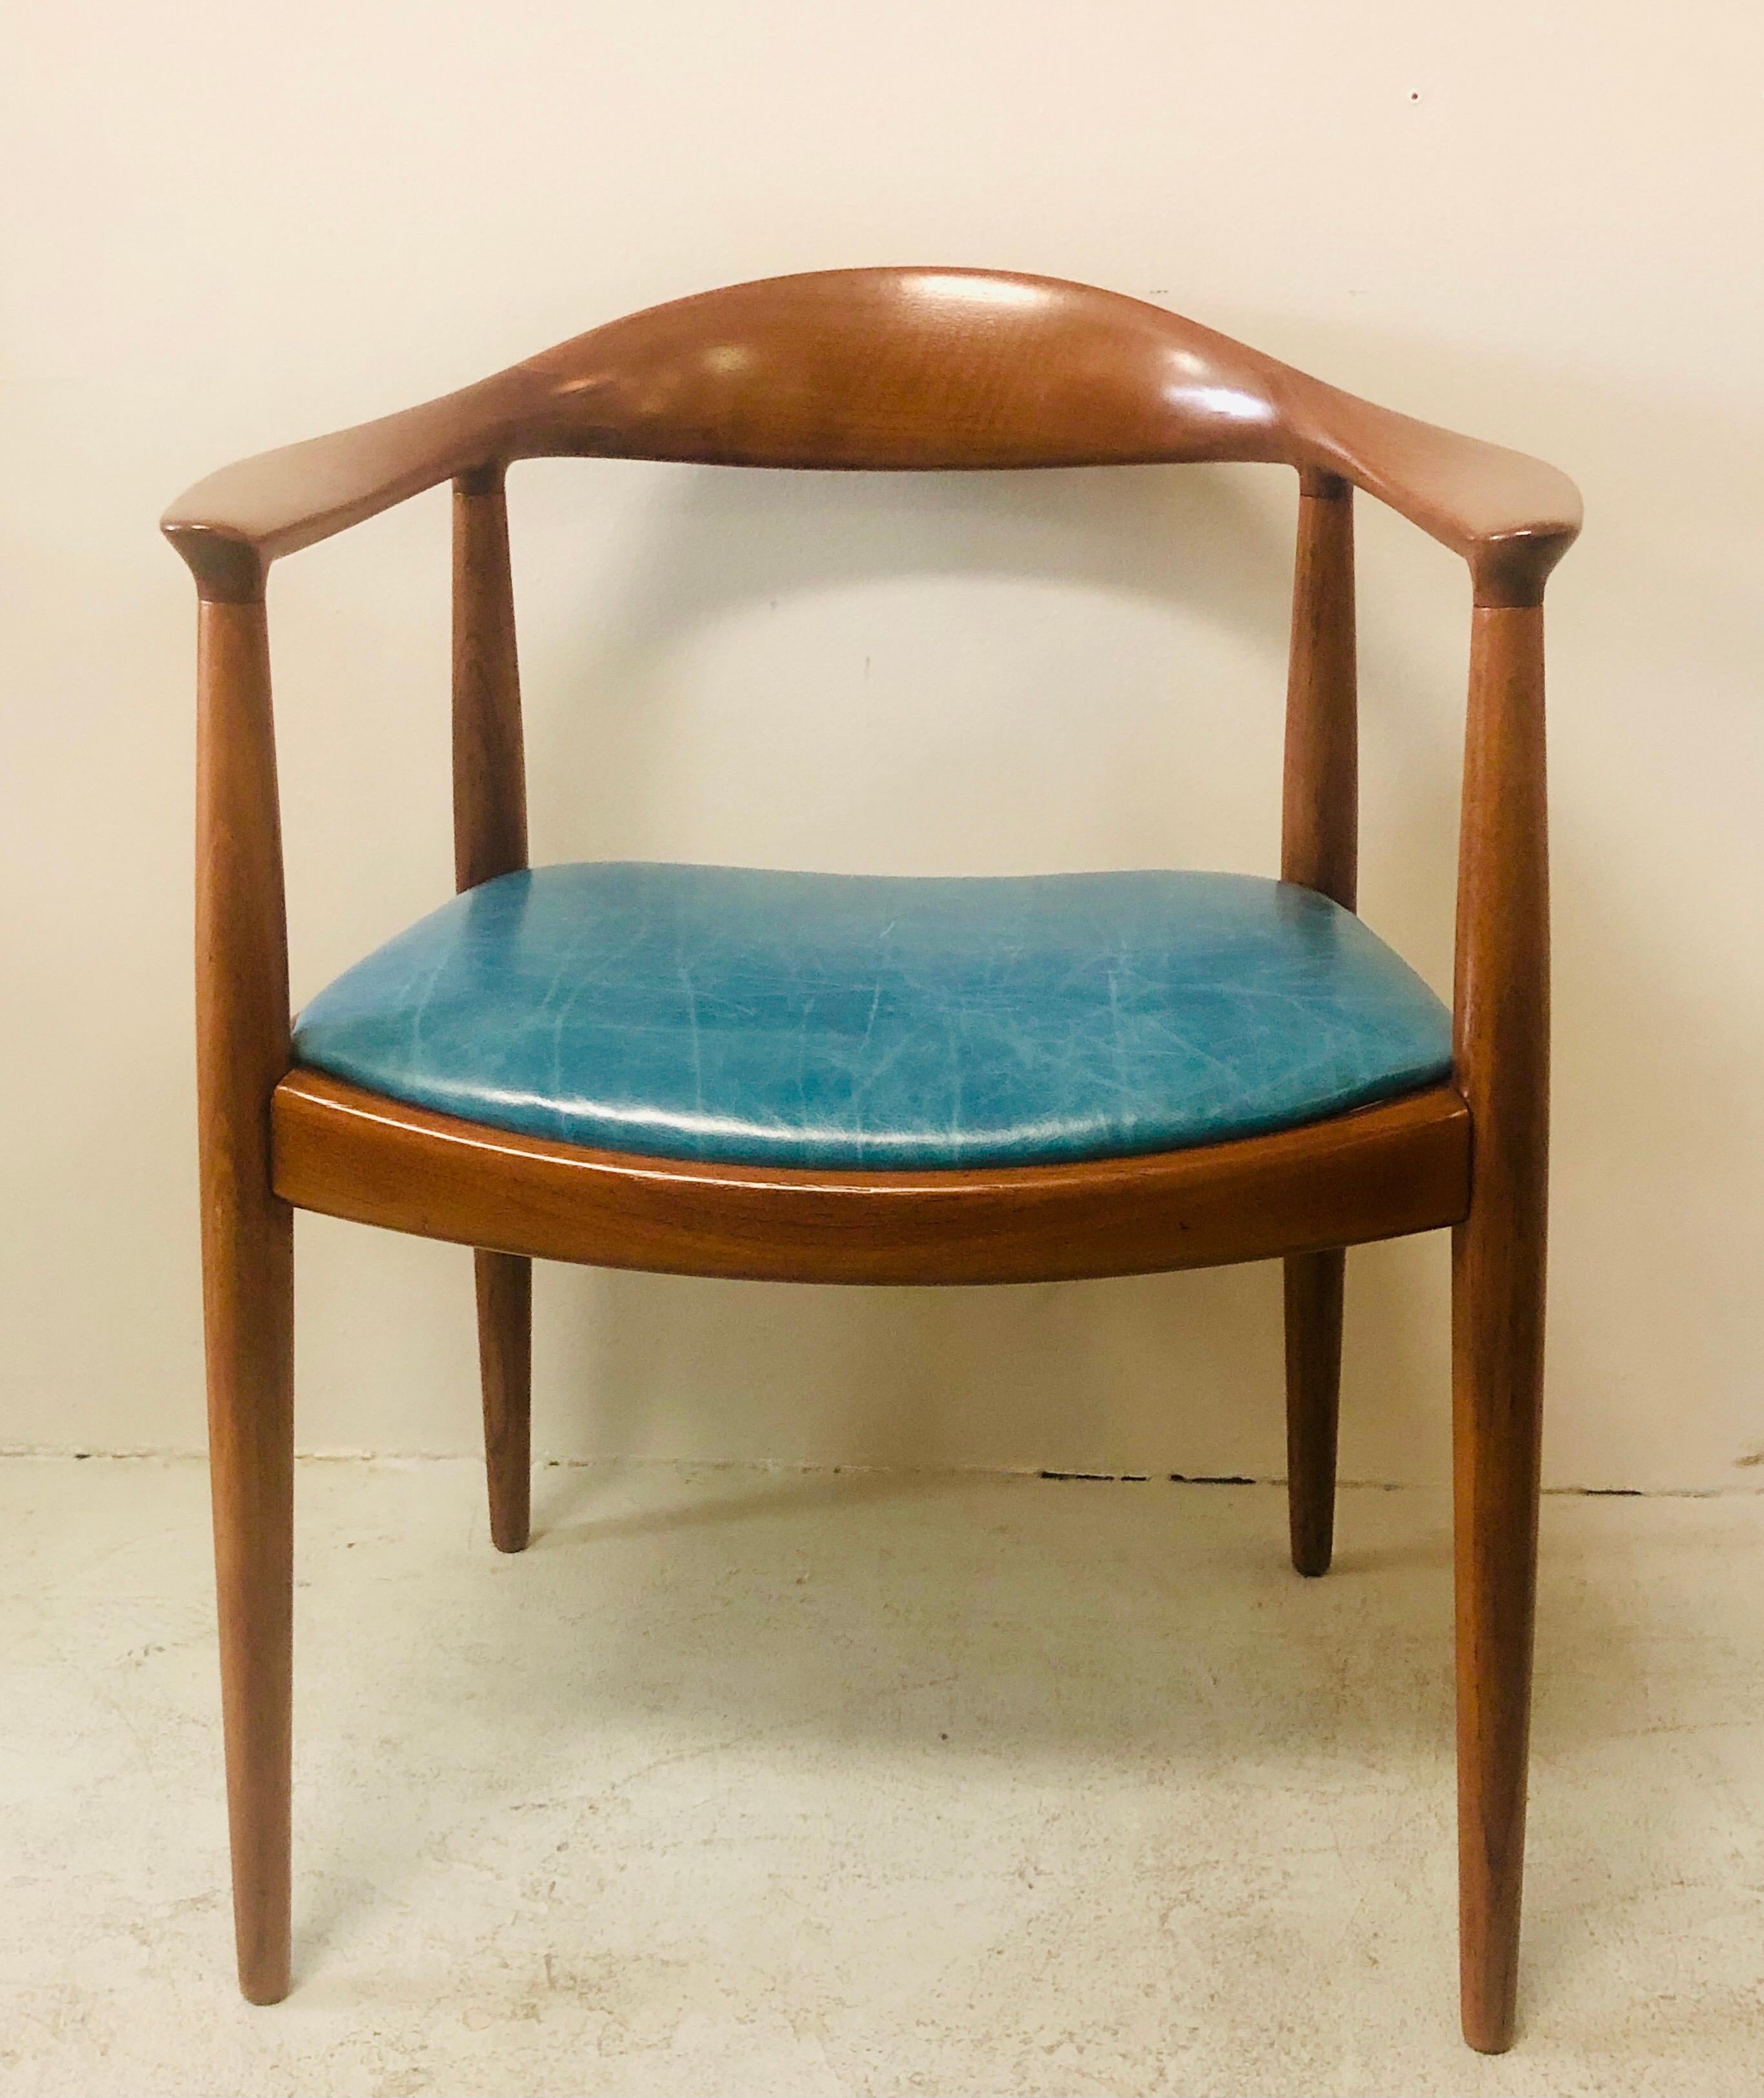 3 chairs available. Signed and numbered. Refinished and new leather upholstery.